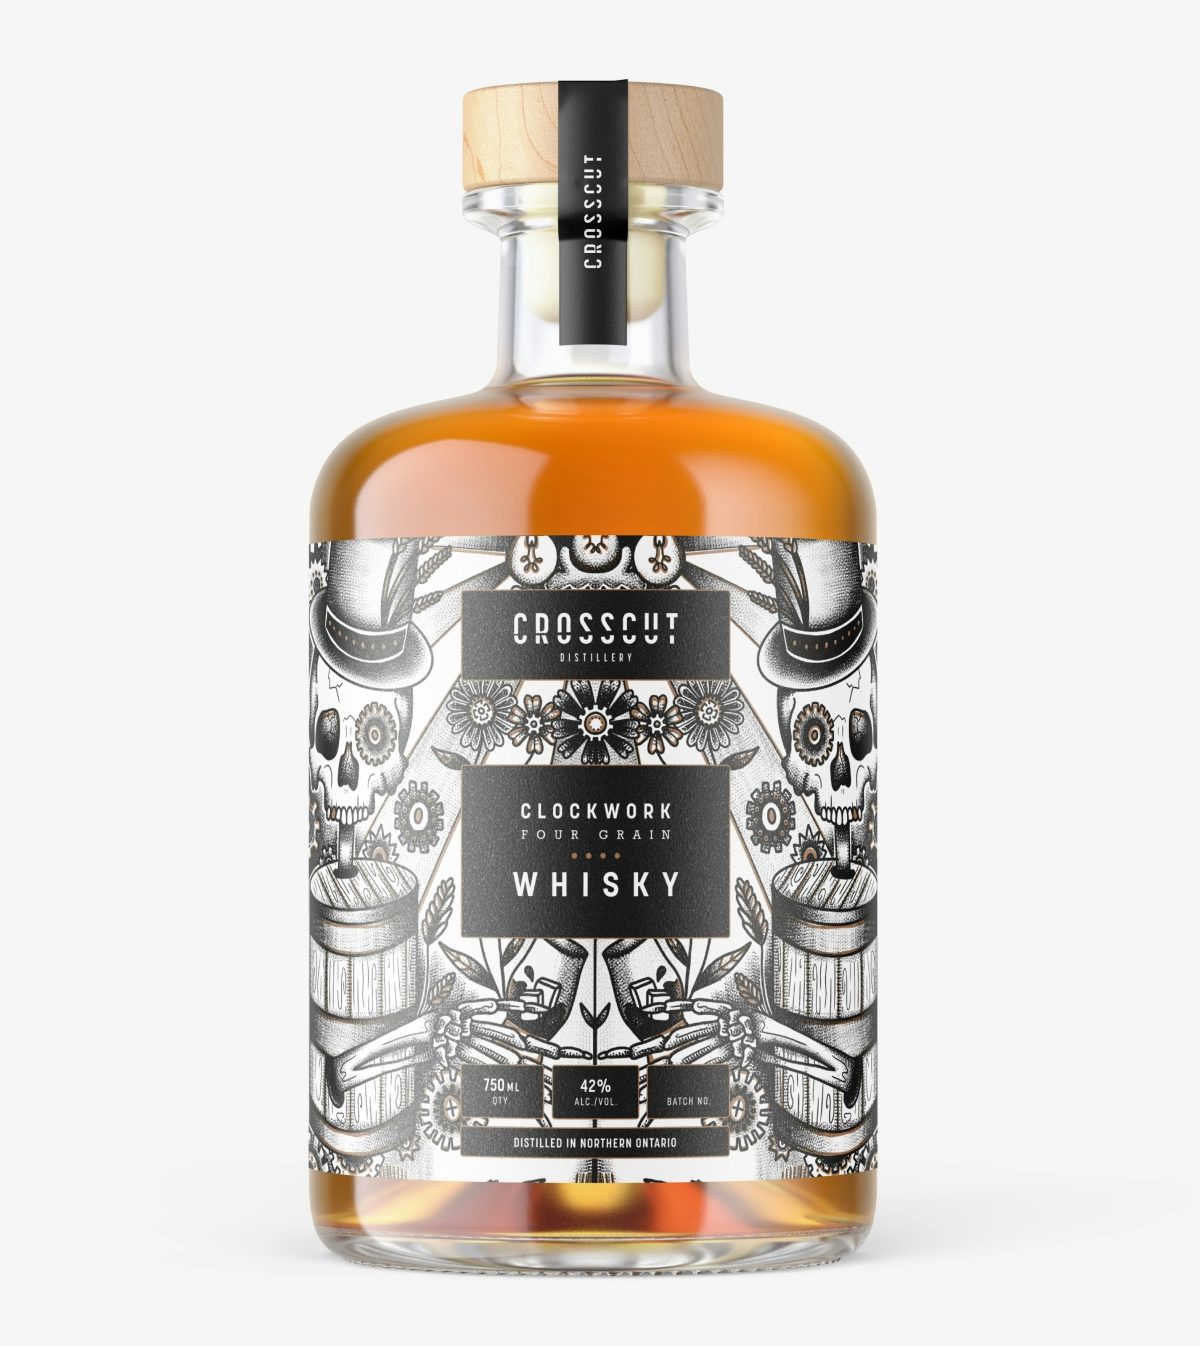 3D model of Crosscut Distillery's Clockwork Four Grain Whisky Gin bottle with black and white labels affixed